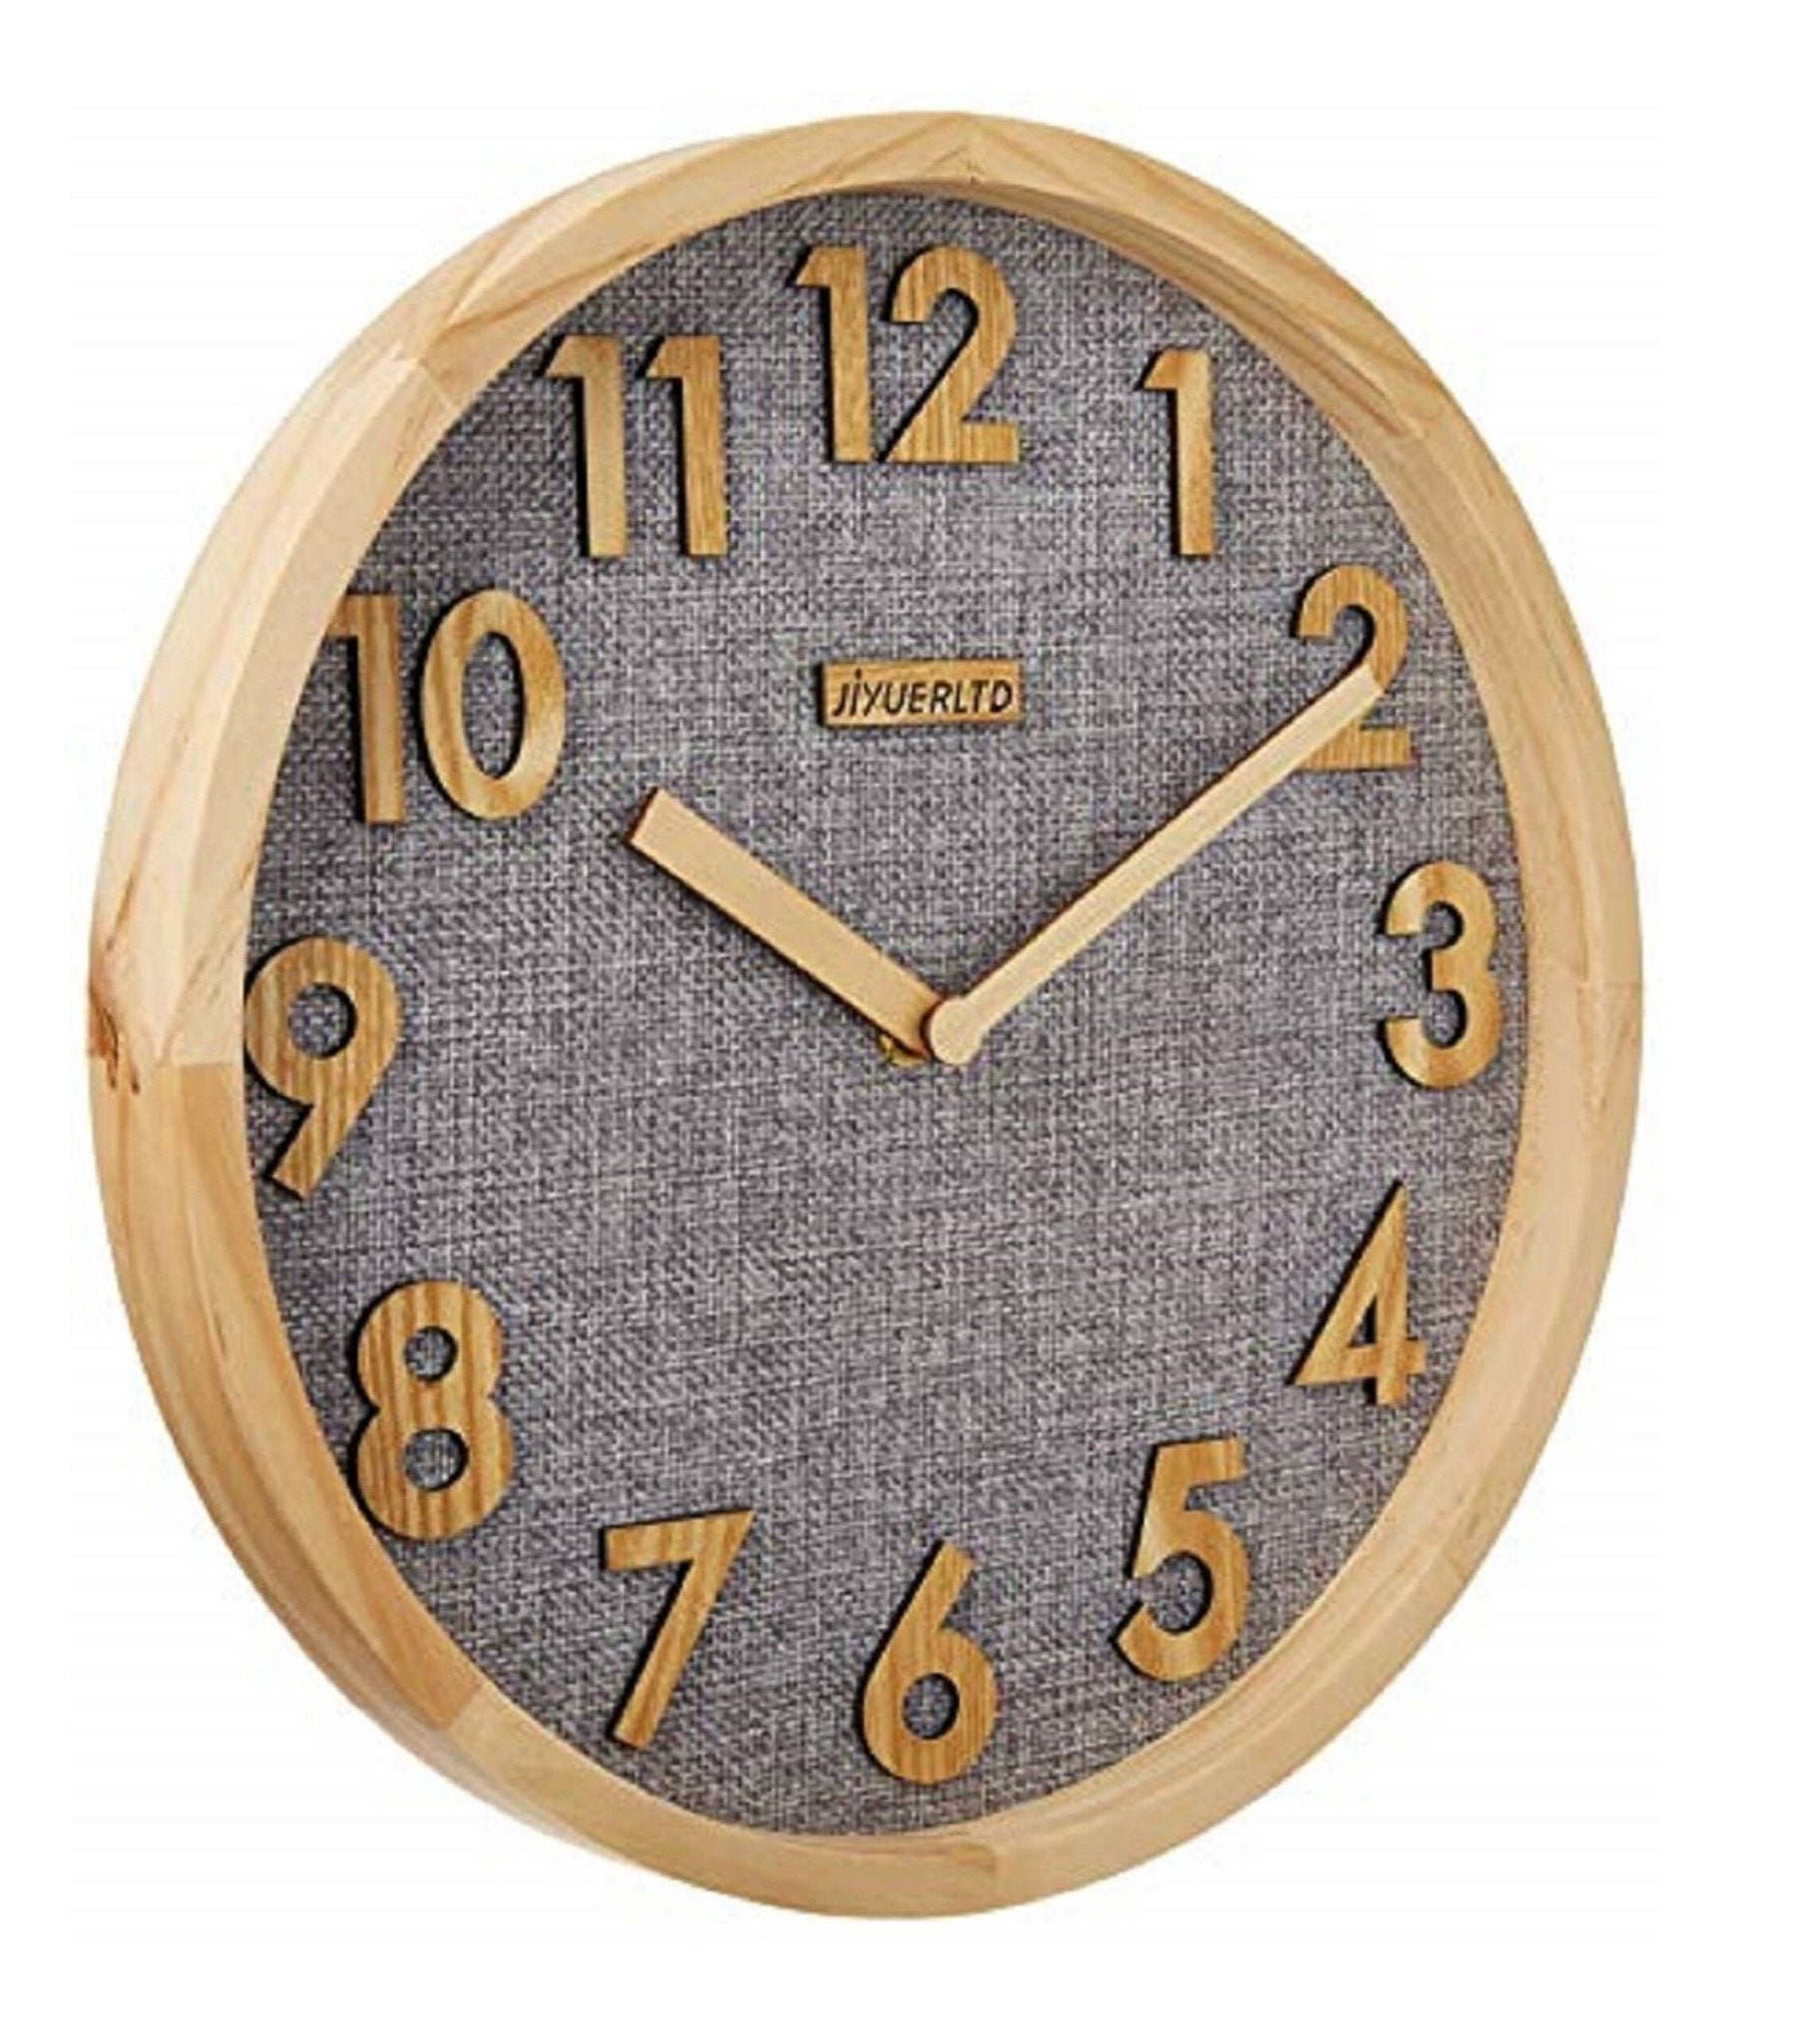 JIYUERLTD Silent Wall Clock 12In Kitchen Clock with 3D Wood Numbers, Non-Ticking Quartz Movement, Linen Face and Wood Frame for Home, Office, Classroom(Gray) - JIYUERLTDJIYUERLTD Silent Wall Clock 12In Kitchen Clock with 3D Wood Numbers, Non-Ticking Quartz Movement, Linen Face and Wood Frame for Home, Office, Classroom(Gray)